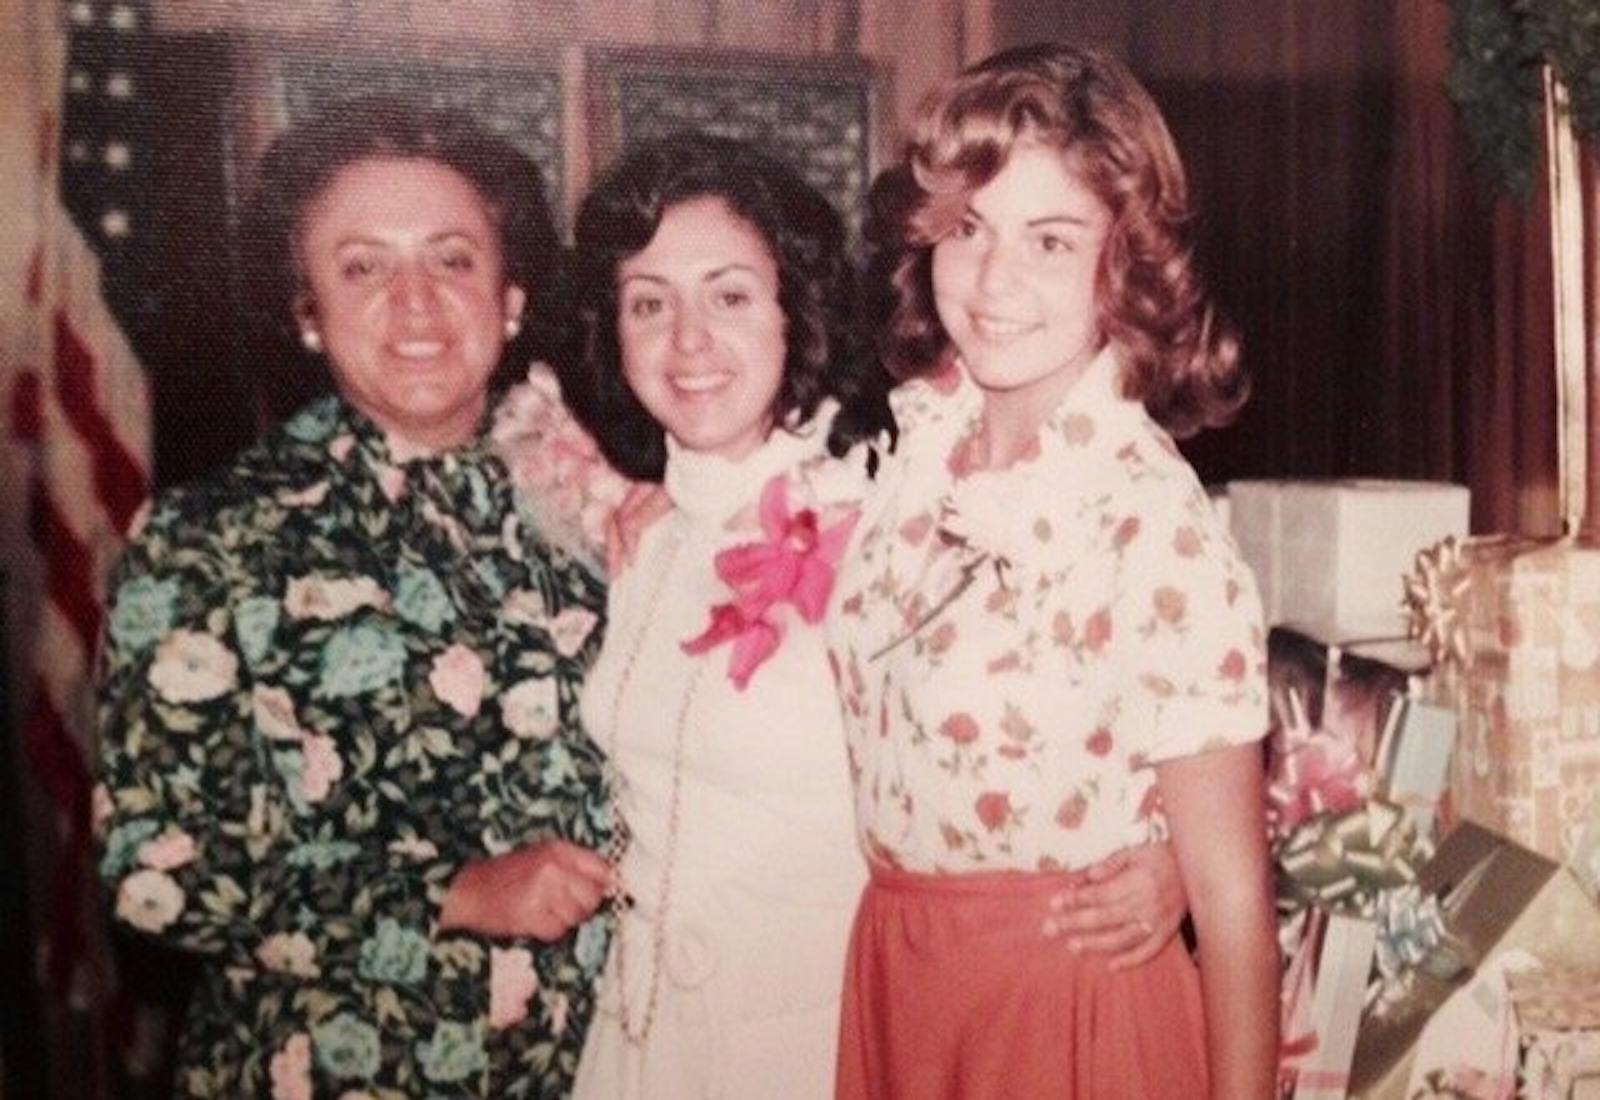 Marsha (right), her sister (center) and Grandma Helena (left) in San Francisco in 1975.